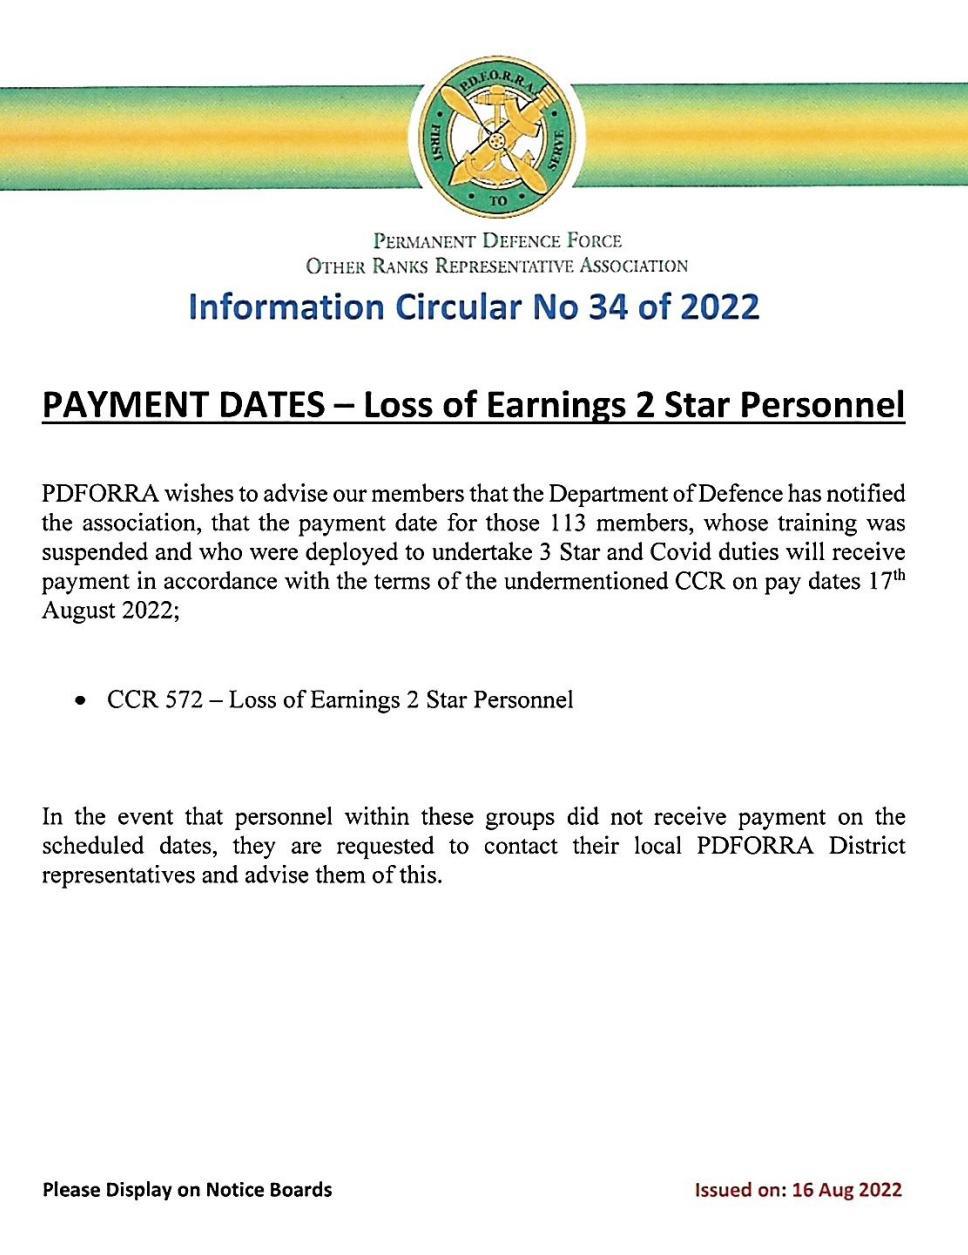 Information Circular No 34 of 22 - Payment Dates Loss of Earnings 2 Star Personnel